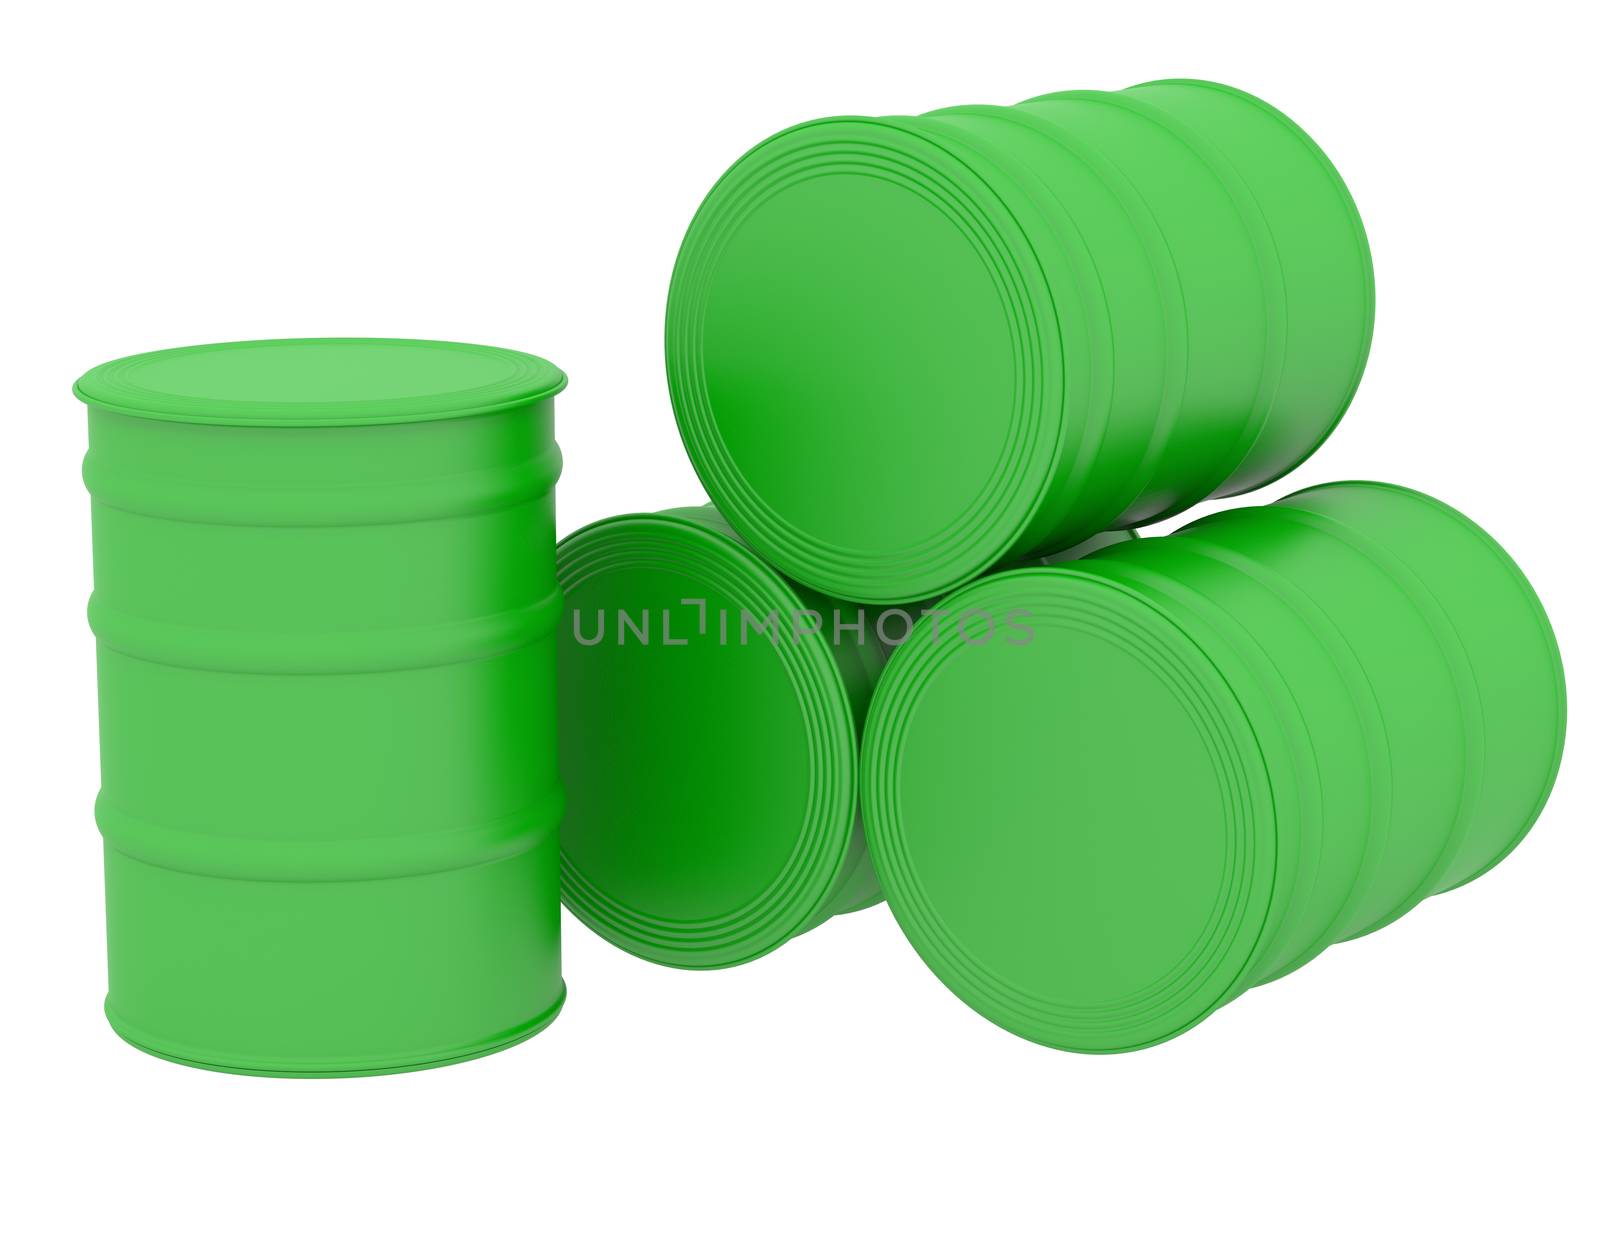 Green barrels natural fuel. 3d render isolated on white background